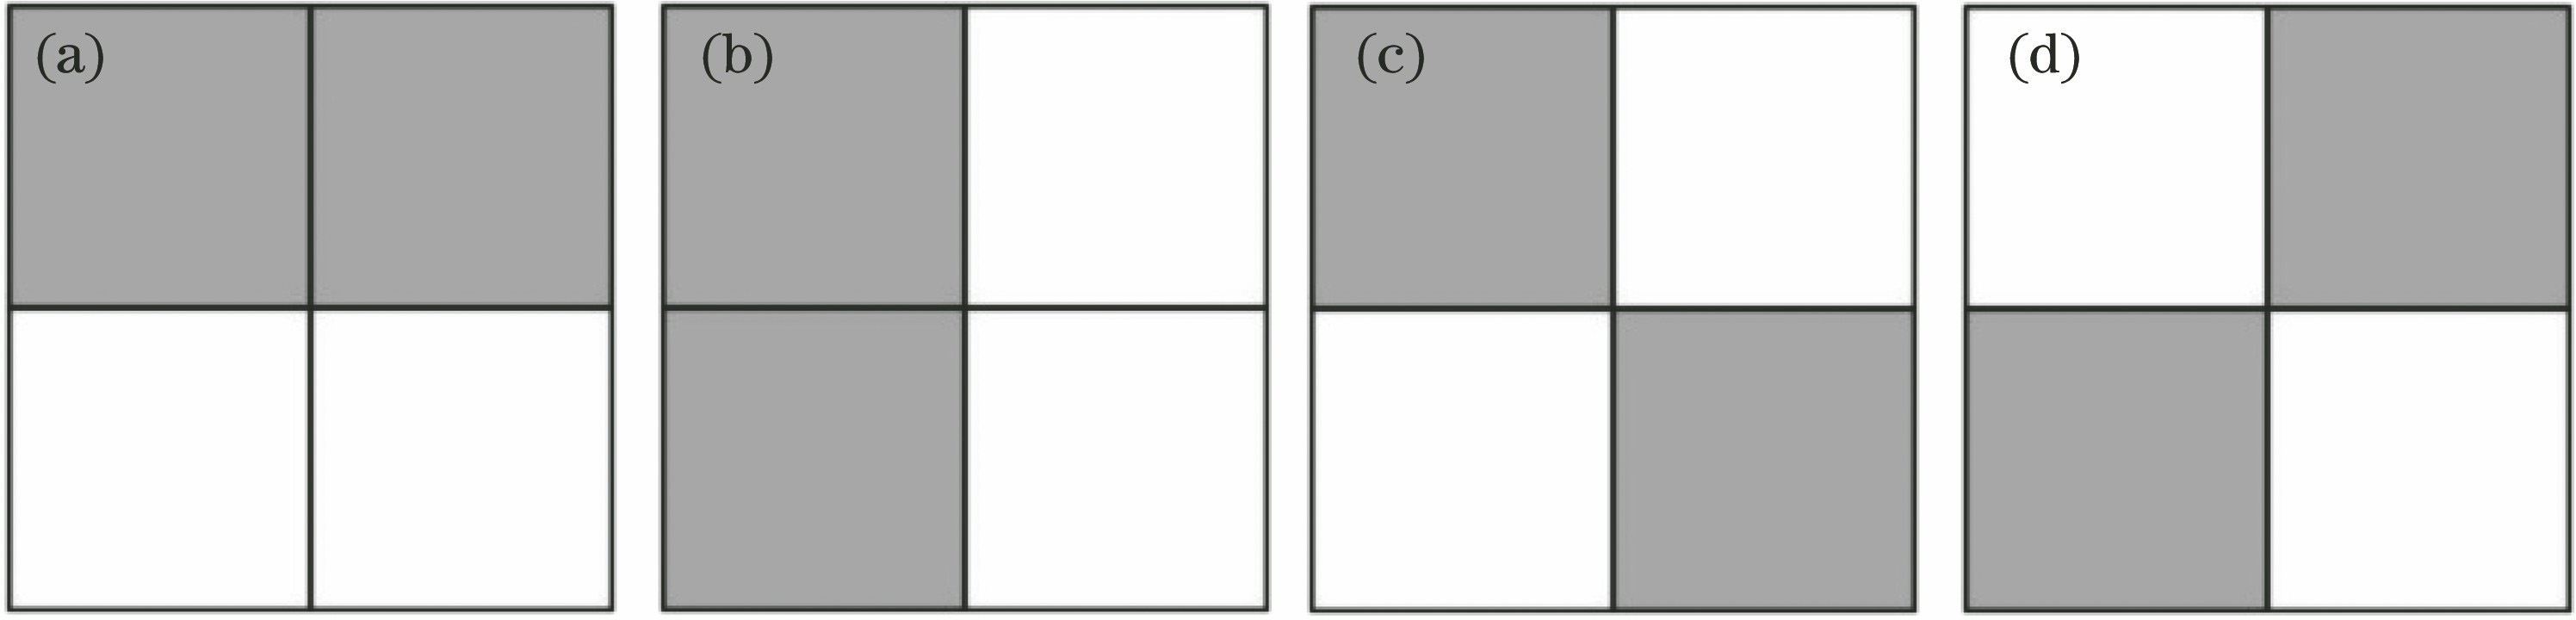 Relative positions of adjacent pixels in 4 cases. (a) Horizontal direction; (b) vertical direction; (c) right diagonal direction; (d) left diagonal direction